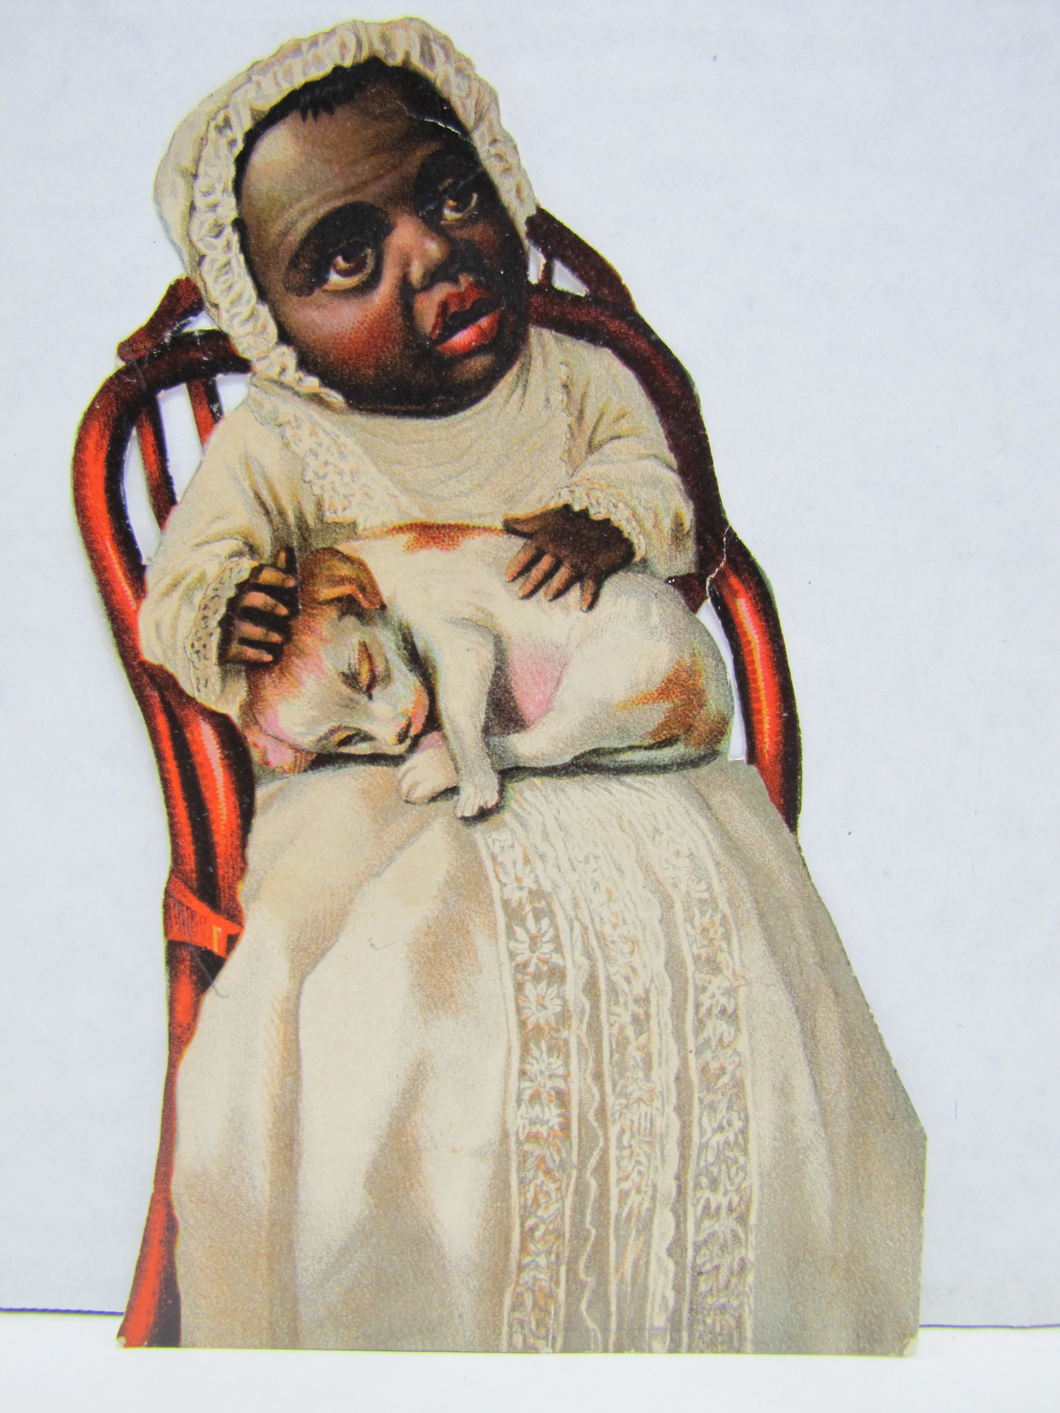 CREEPY LOOKING ANTIQUE BLACK AMERICANA CHILD IN DRESS WITH DOG IN CHAIR PAPER CUT-OUT